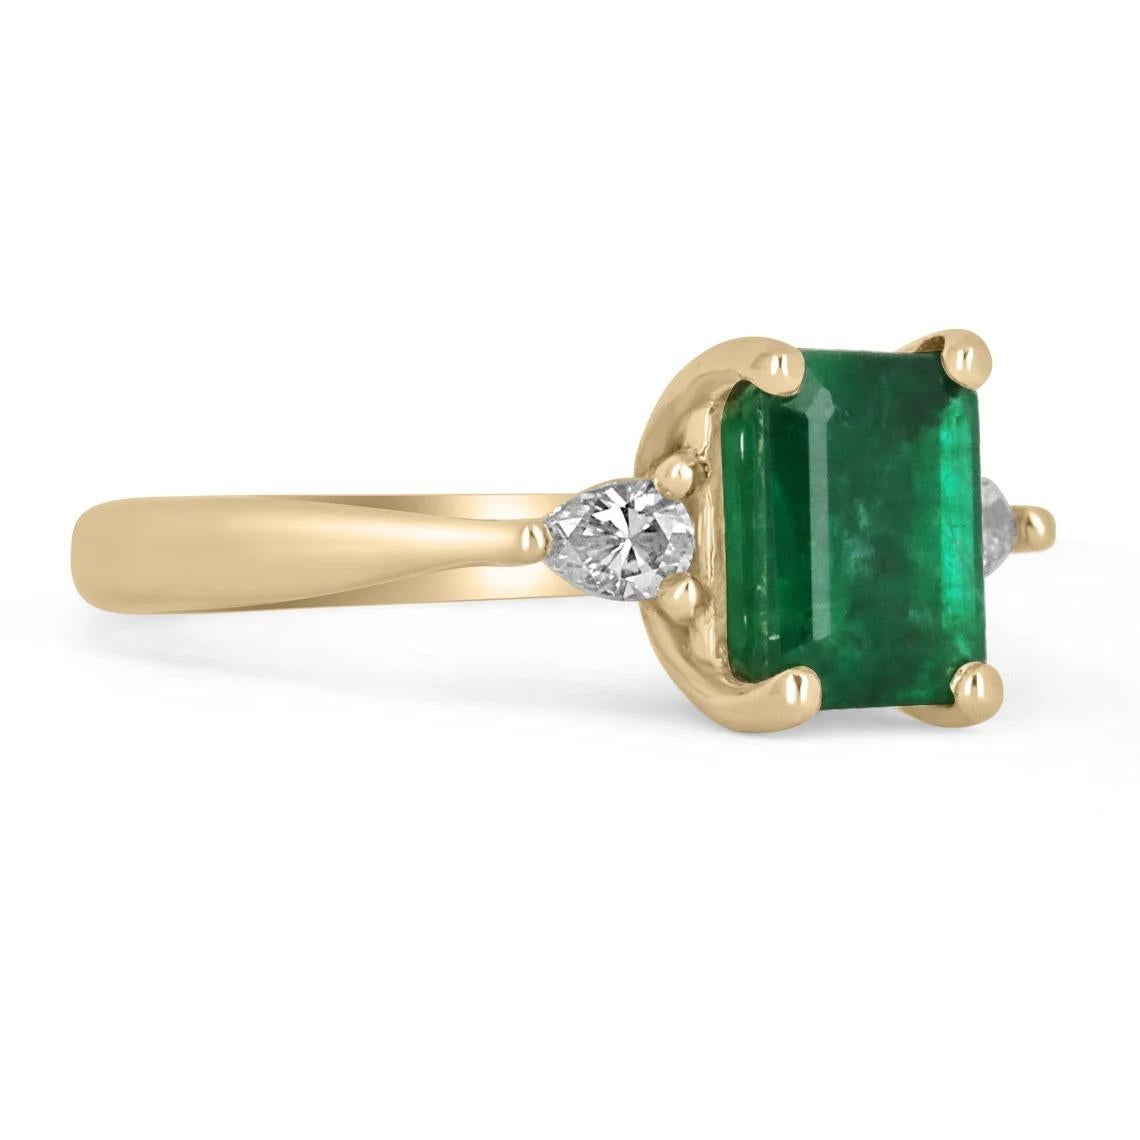 A classic emerald and diamond three stone, engagement, statement, or right-hand ring. Dexterously crafted in gleaming 14K yellow gold this ring features a 3.57-carat natural emerald-emerald cut. Set in a secure prong setting, this extraordinary